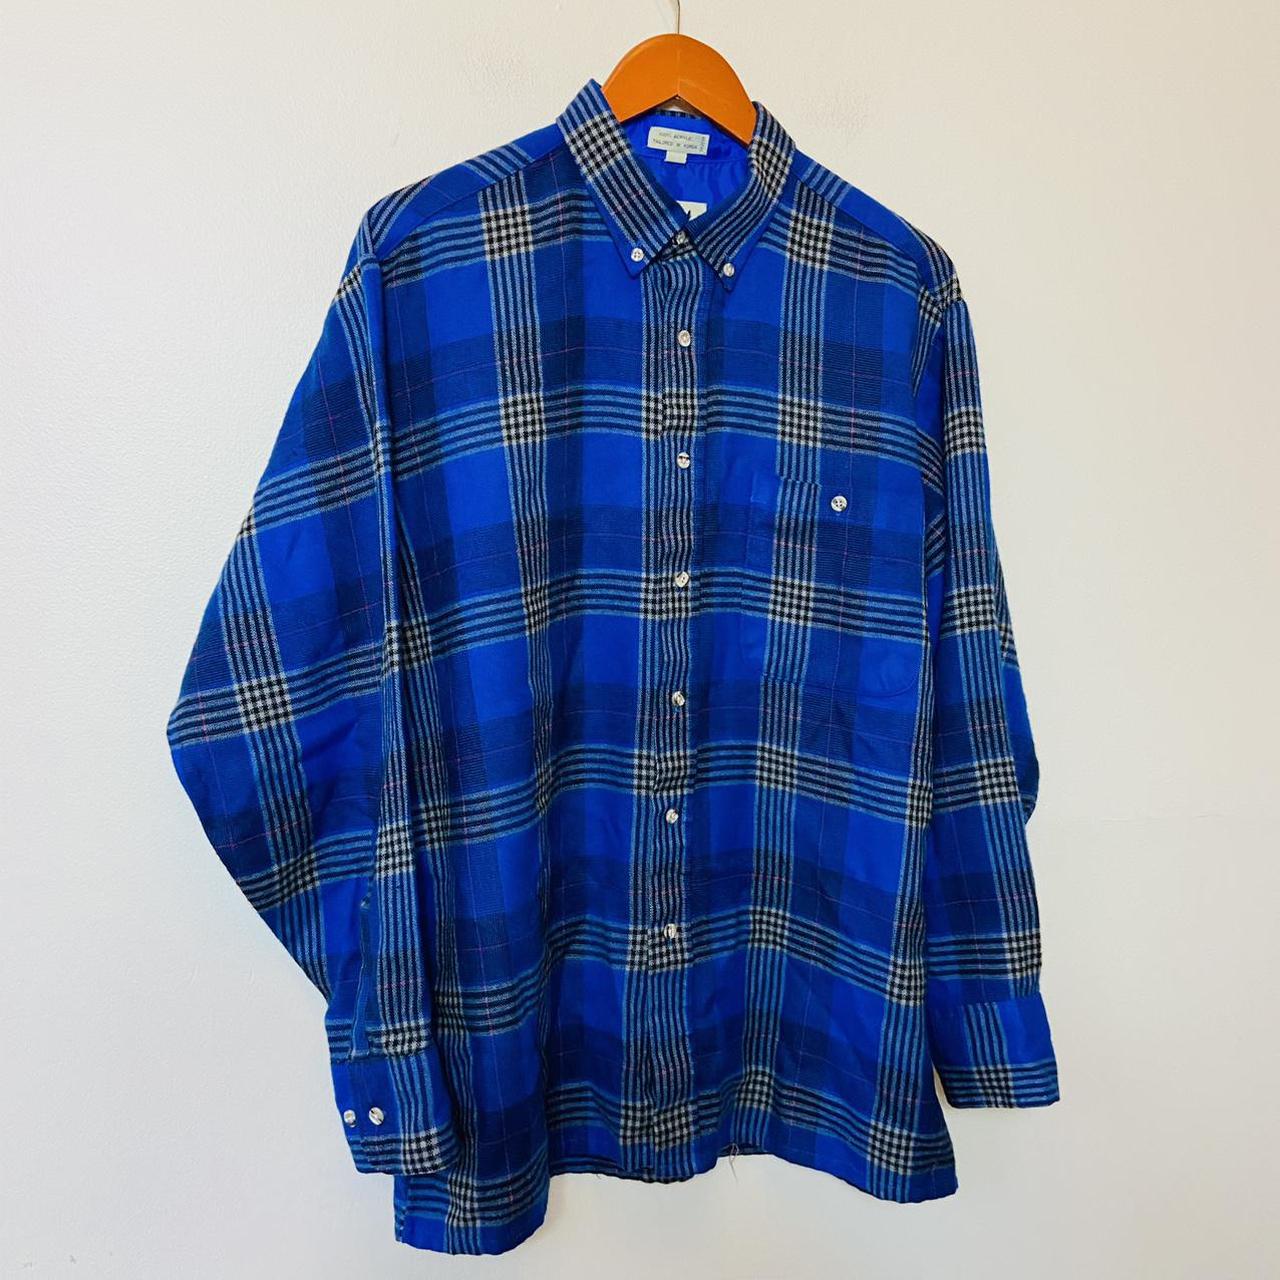 Product Image 1 - VINTAGE 1980s 1990s FLANNEL SHIRT